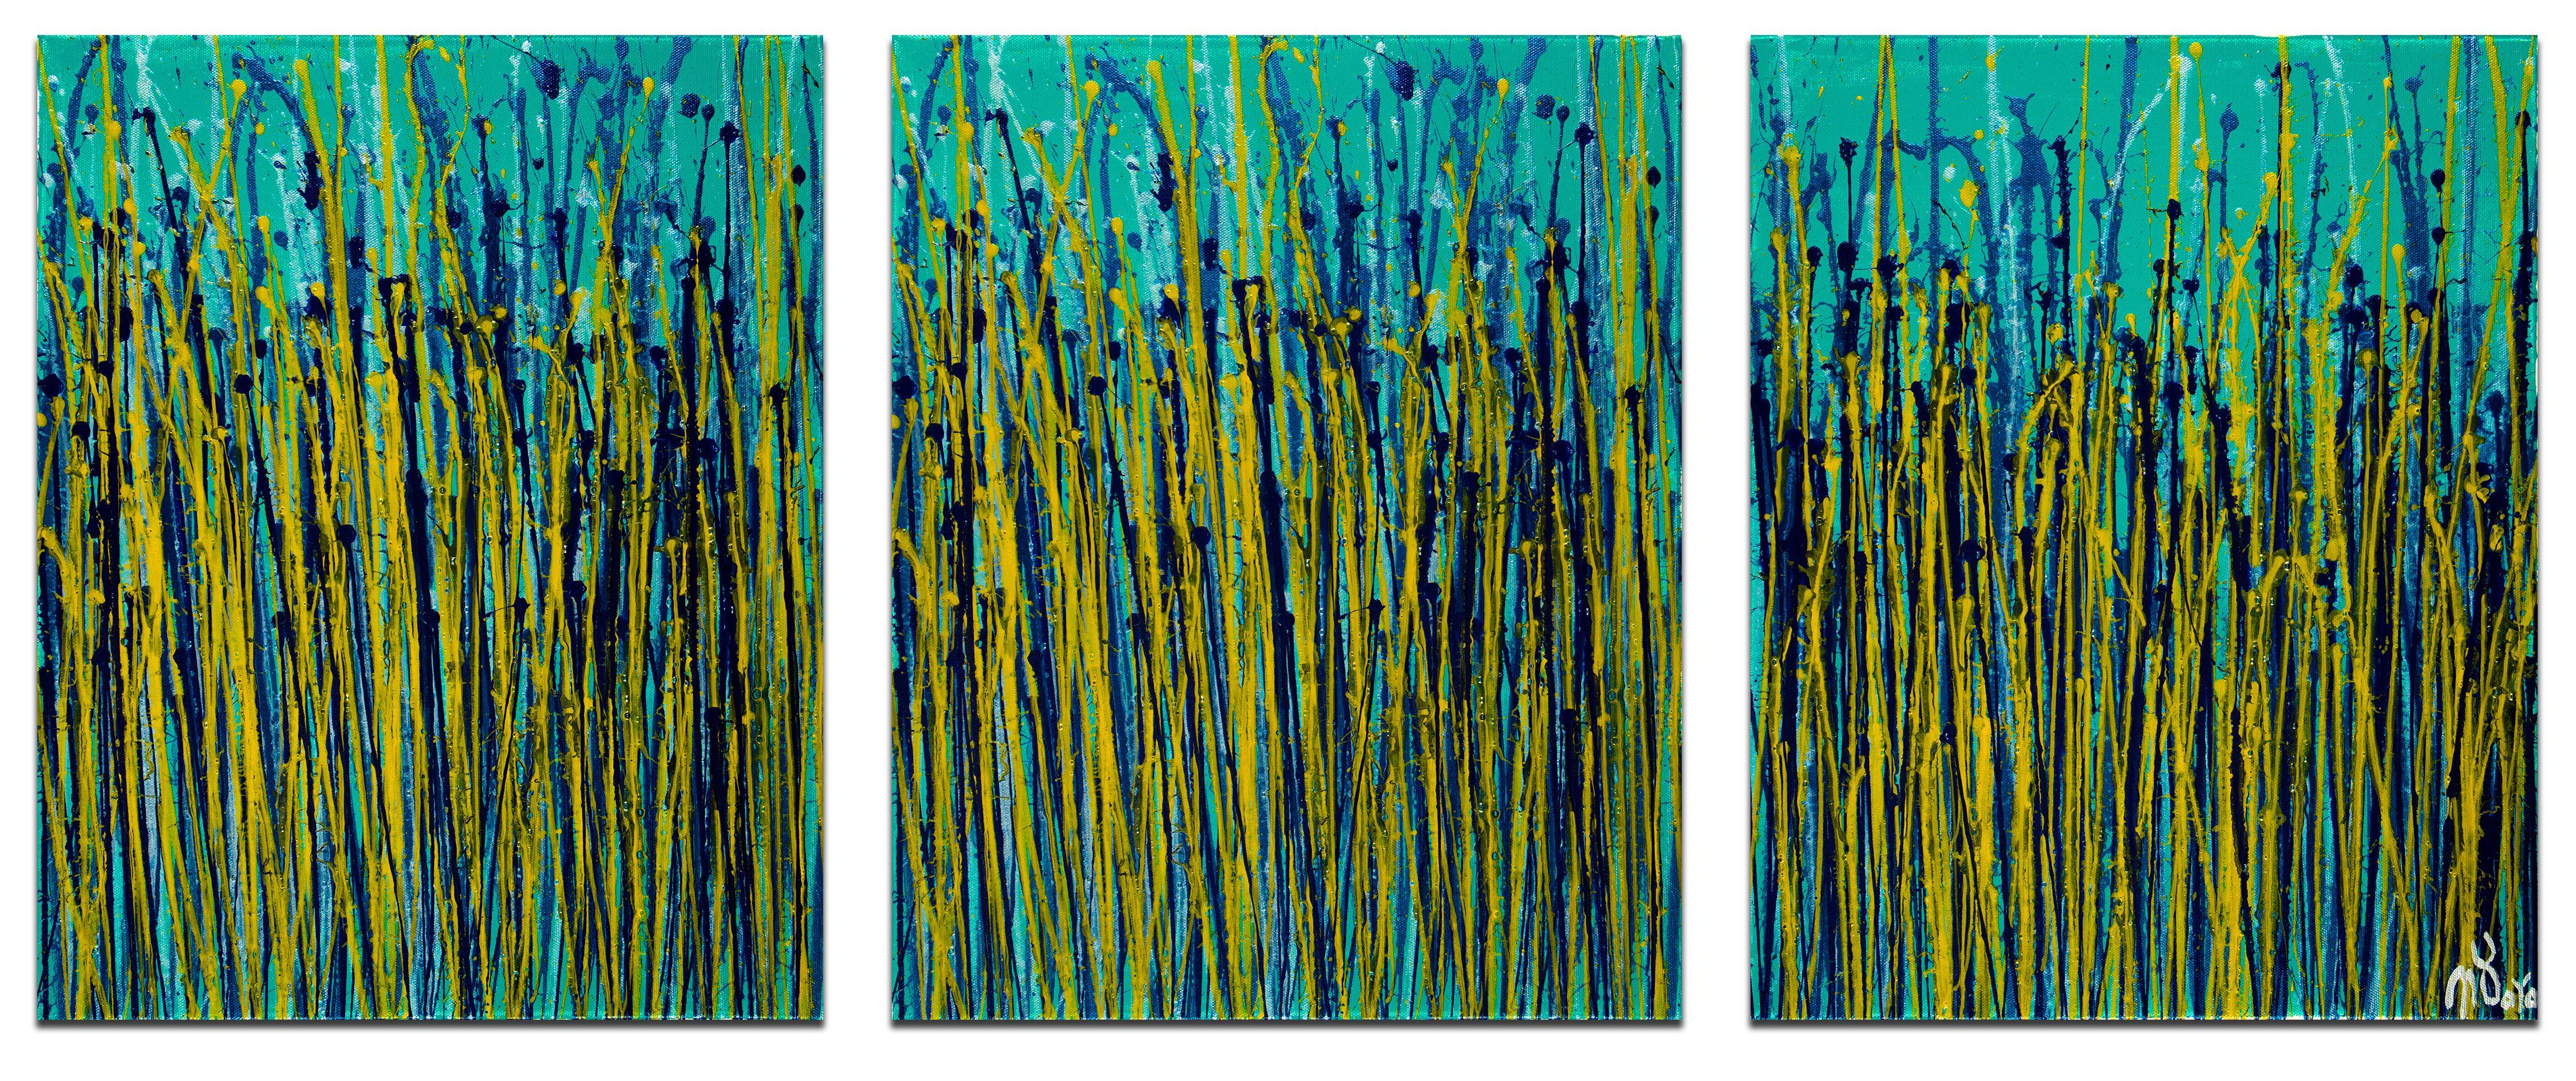 Painting: Acrylic on Canvas.    Three canvases1 - 16 W x 20 H x 0.7 in each.    Expressive modern abstract, bold full of life, gloss and shimmer! inspired by nature, many colors combined with mica particles. Yellow, blue and green. Ready to hang and